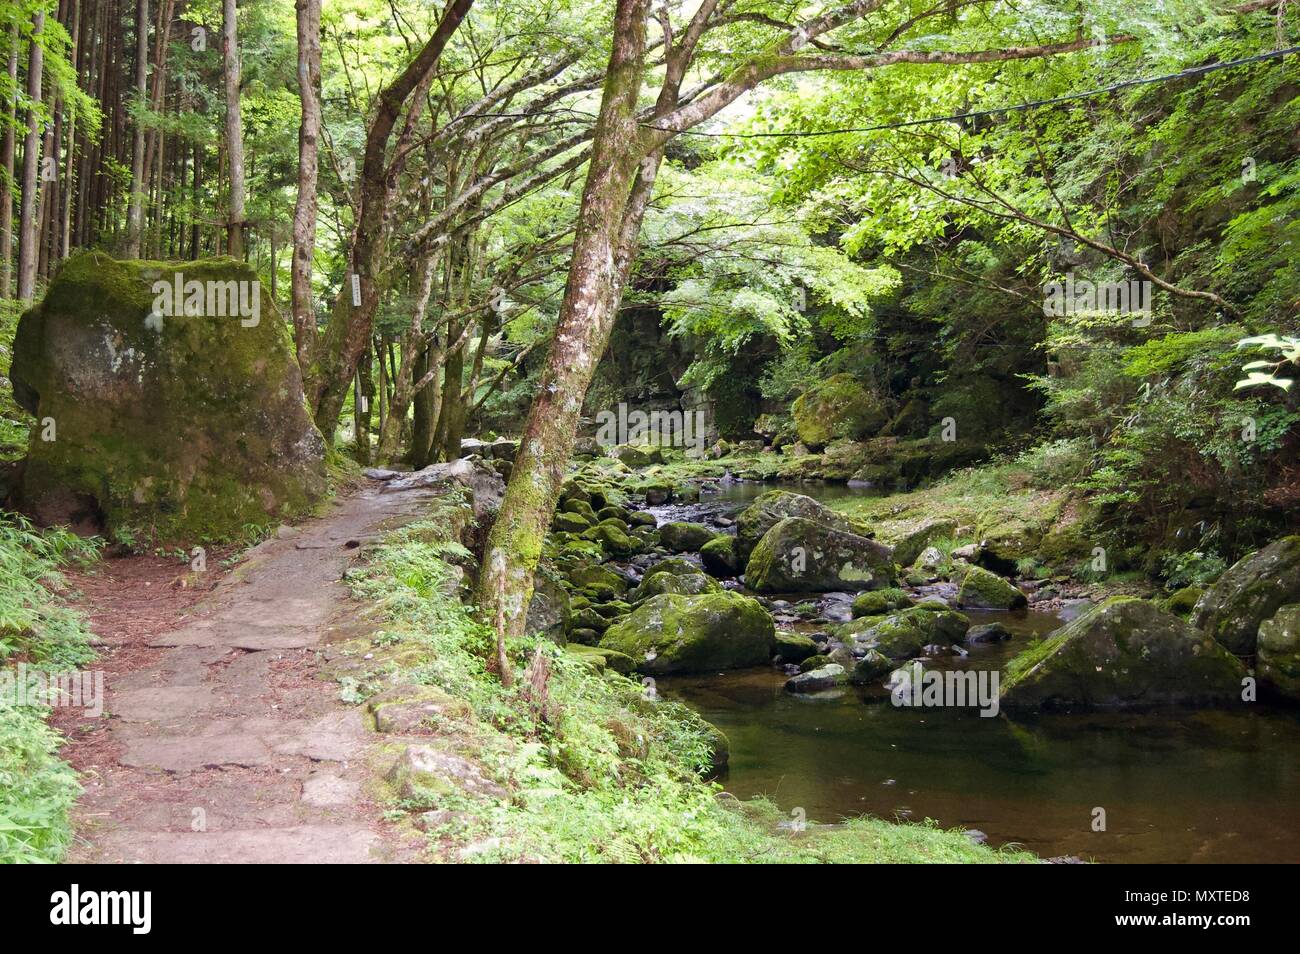 Akame 48 Waterfalls: Mysterious hiking trail through giant trees, giant mossy rock formations, untouched nature & lush vegetation leading to waterfall Stock Photo